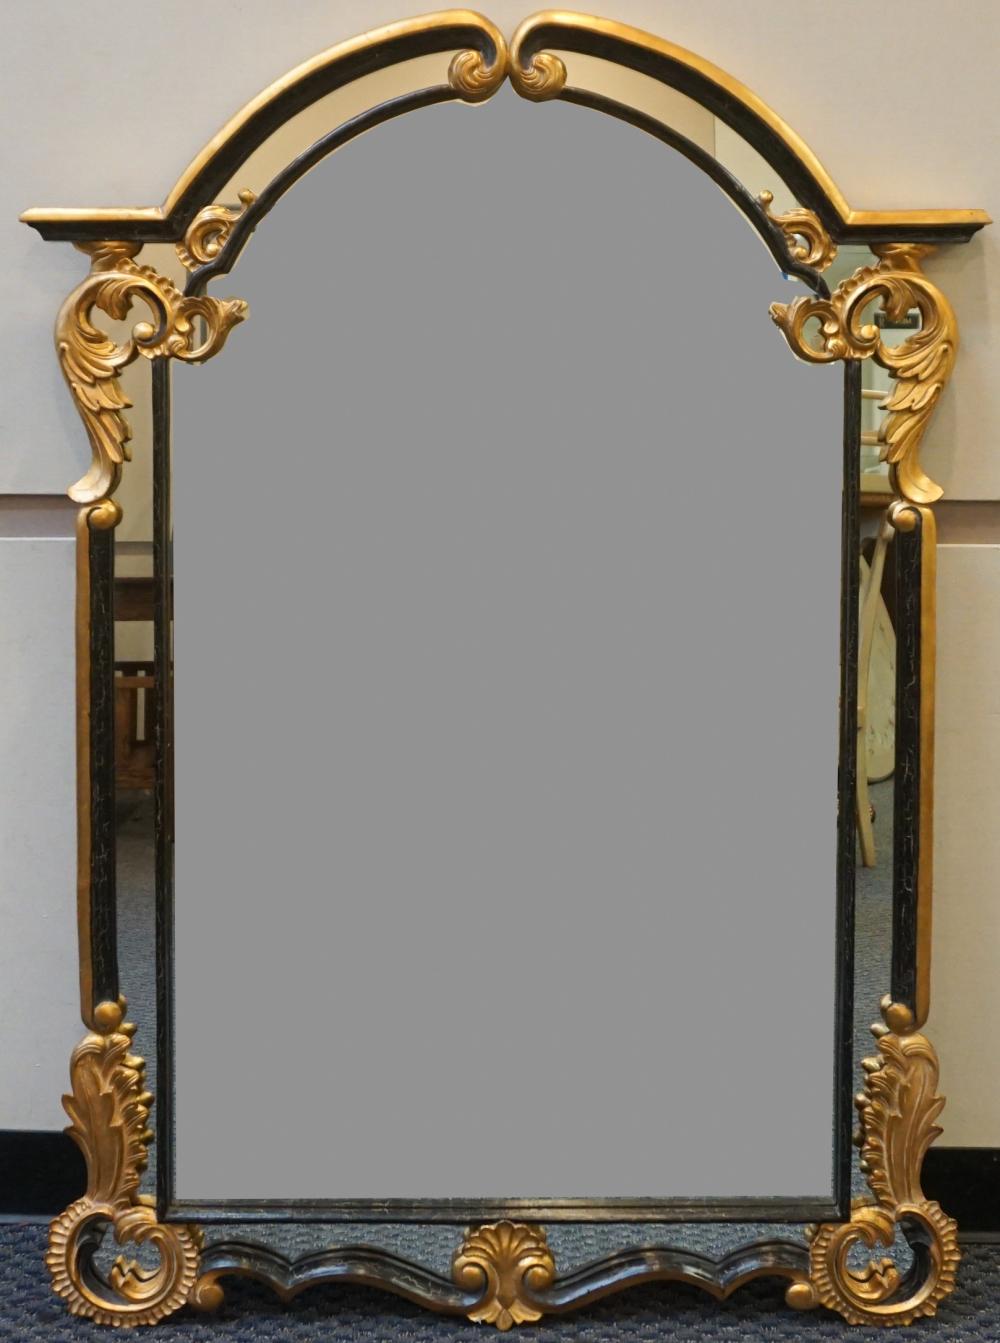 NEOCLASSICAL STYLE PARCEL GILT 32d95f